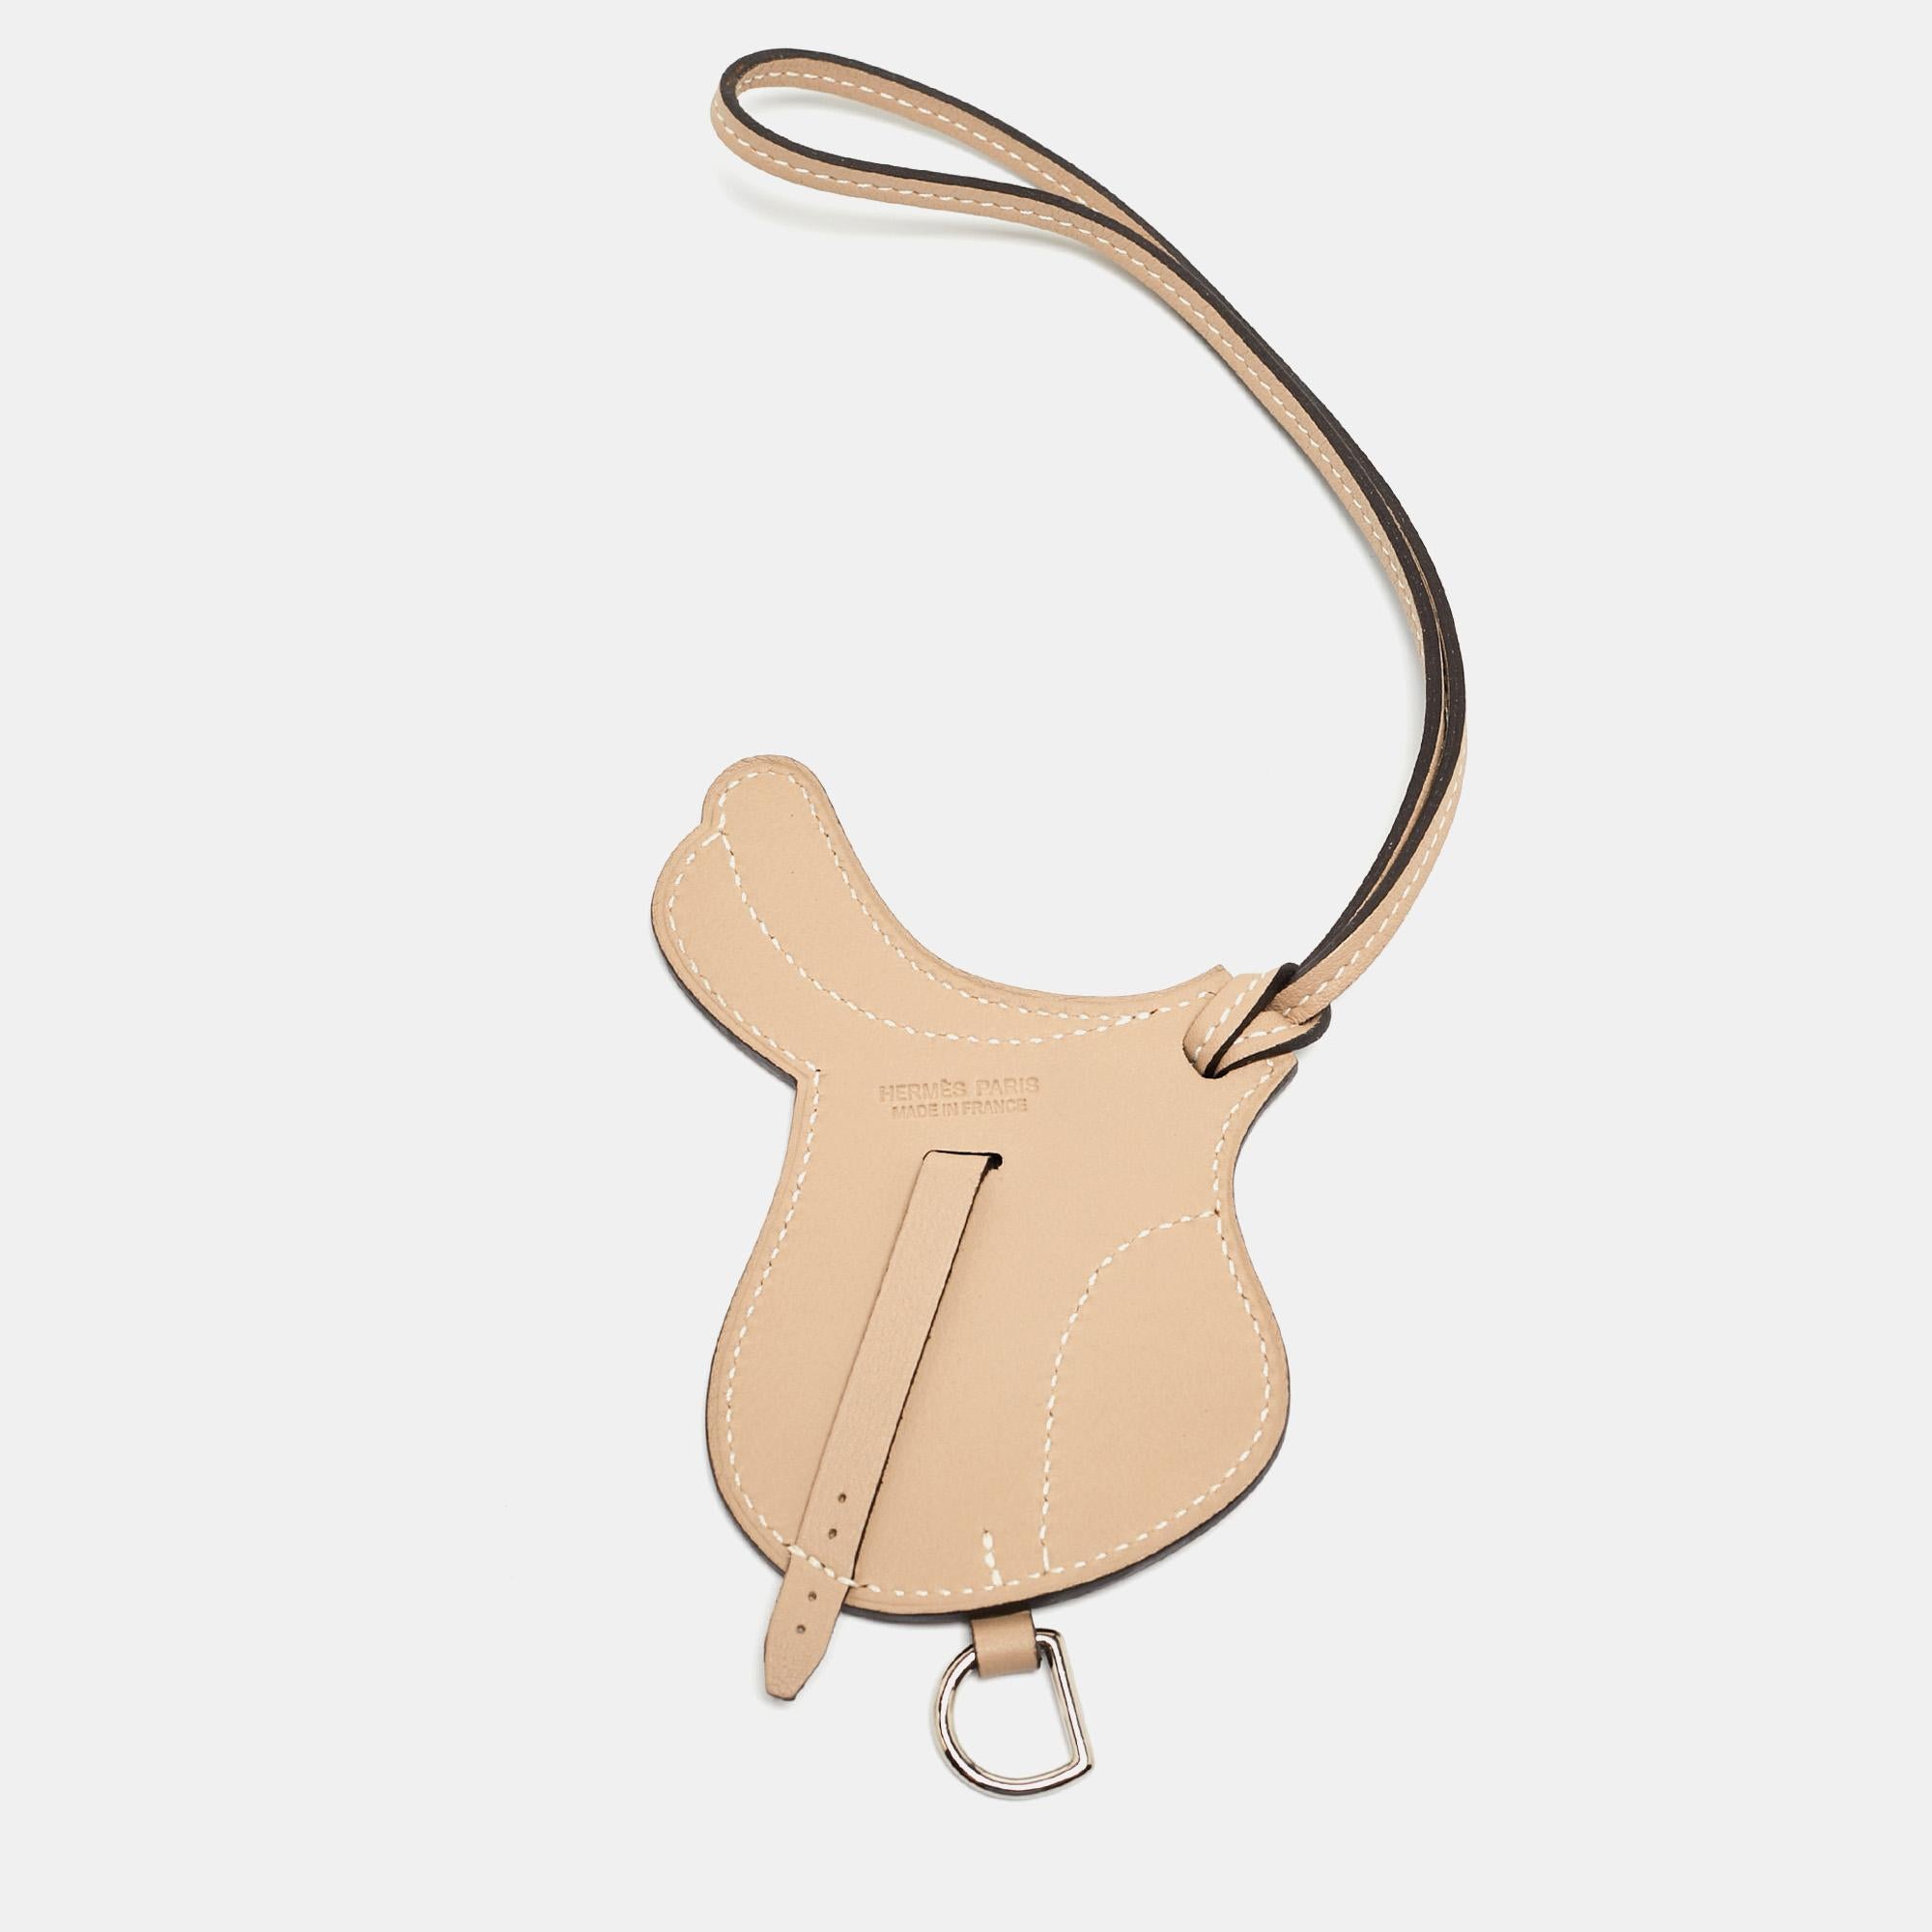 The Hermès Paddock Selle bag charm is an exquisite accessory crafted from luxurious Swift Leather. Its design features a luxe beige shade. This charming piece perfectly complements any Hermès bag, adding a touch of elegance and sophistication.

